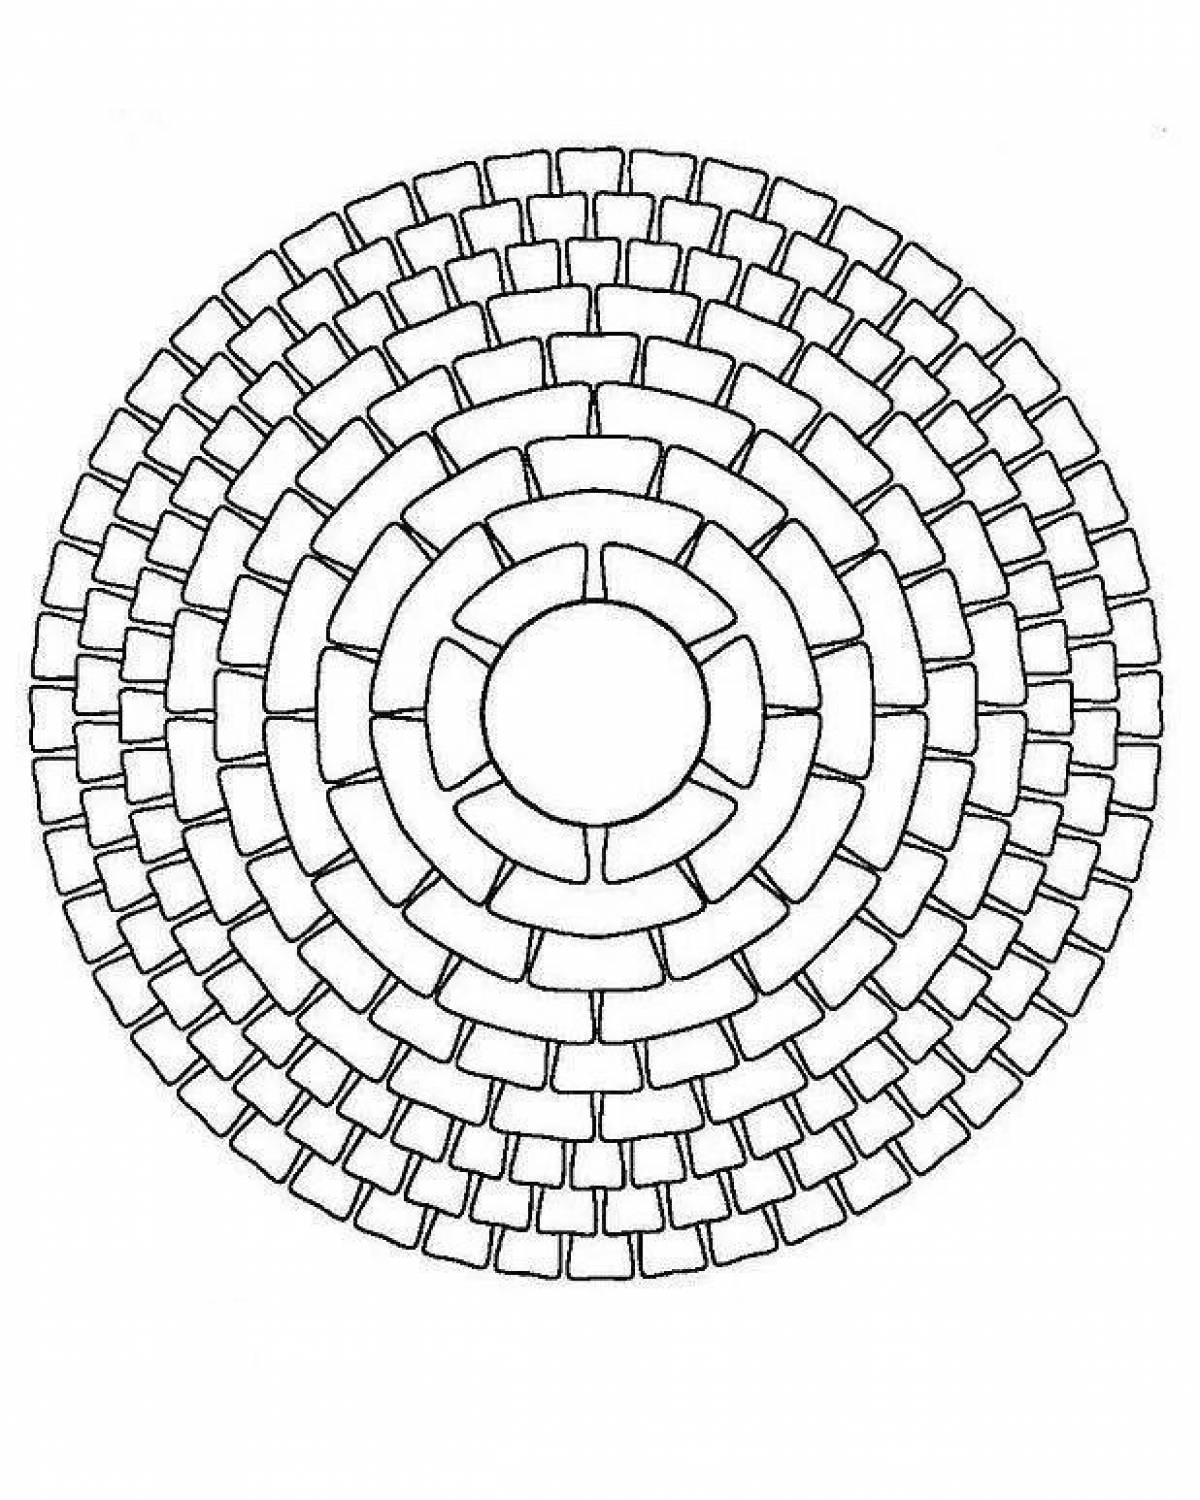 Exciting round spiral coloring page